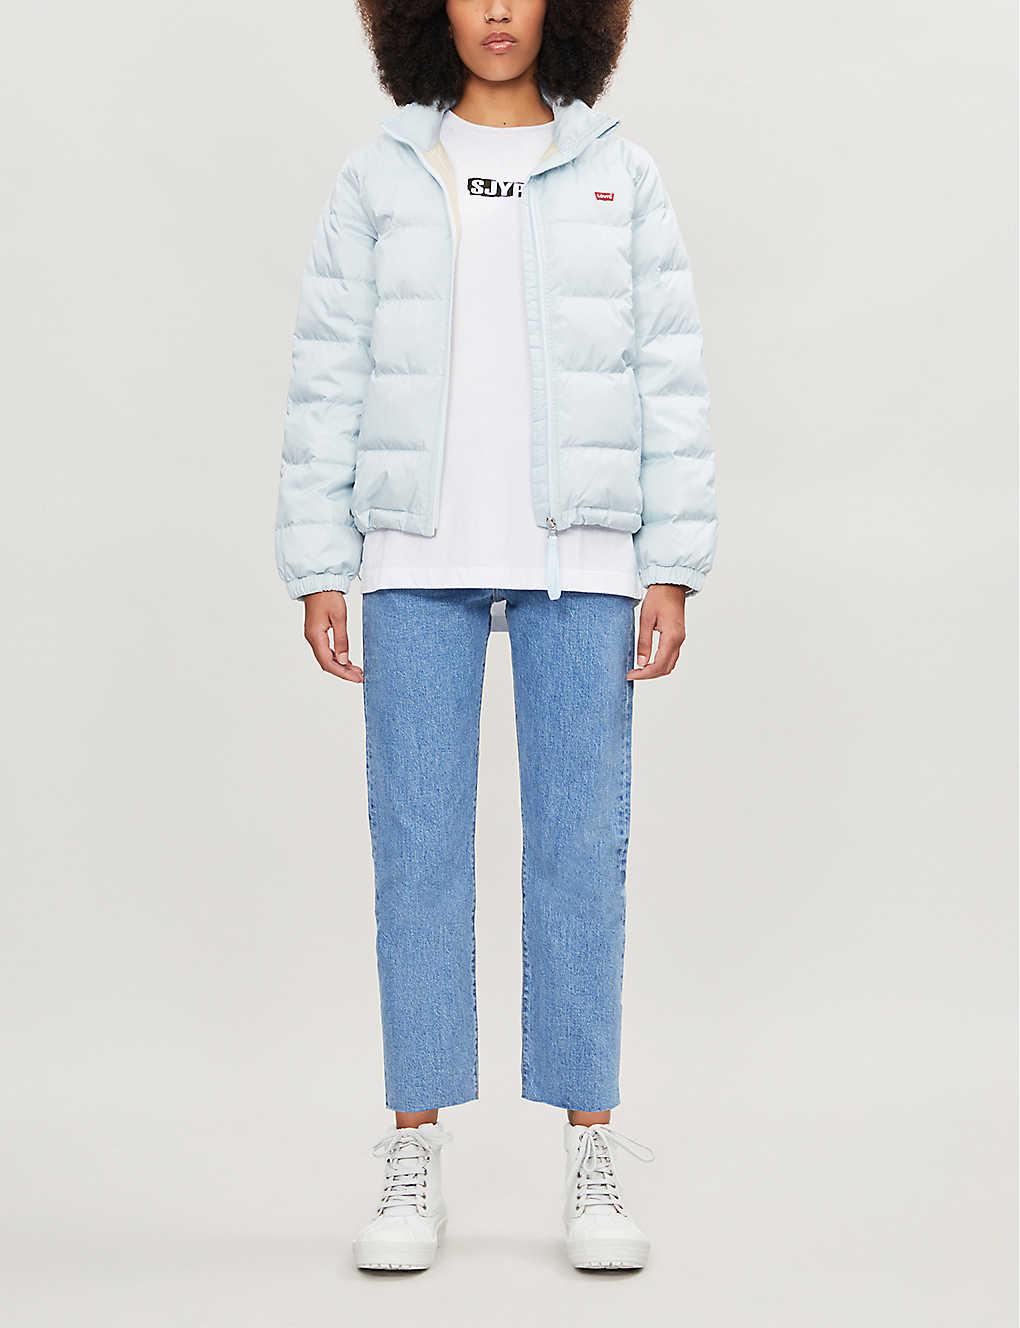 Levi's Francine Shell-down Packable Puffer Jacket in Baby Blue (Blue) - Lyst